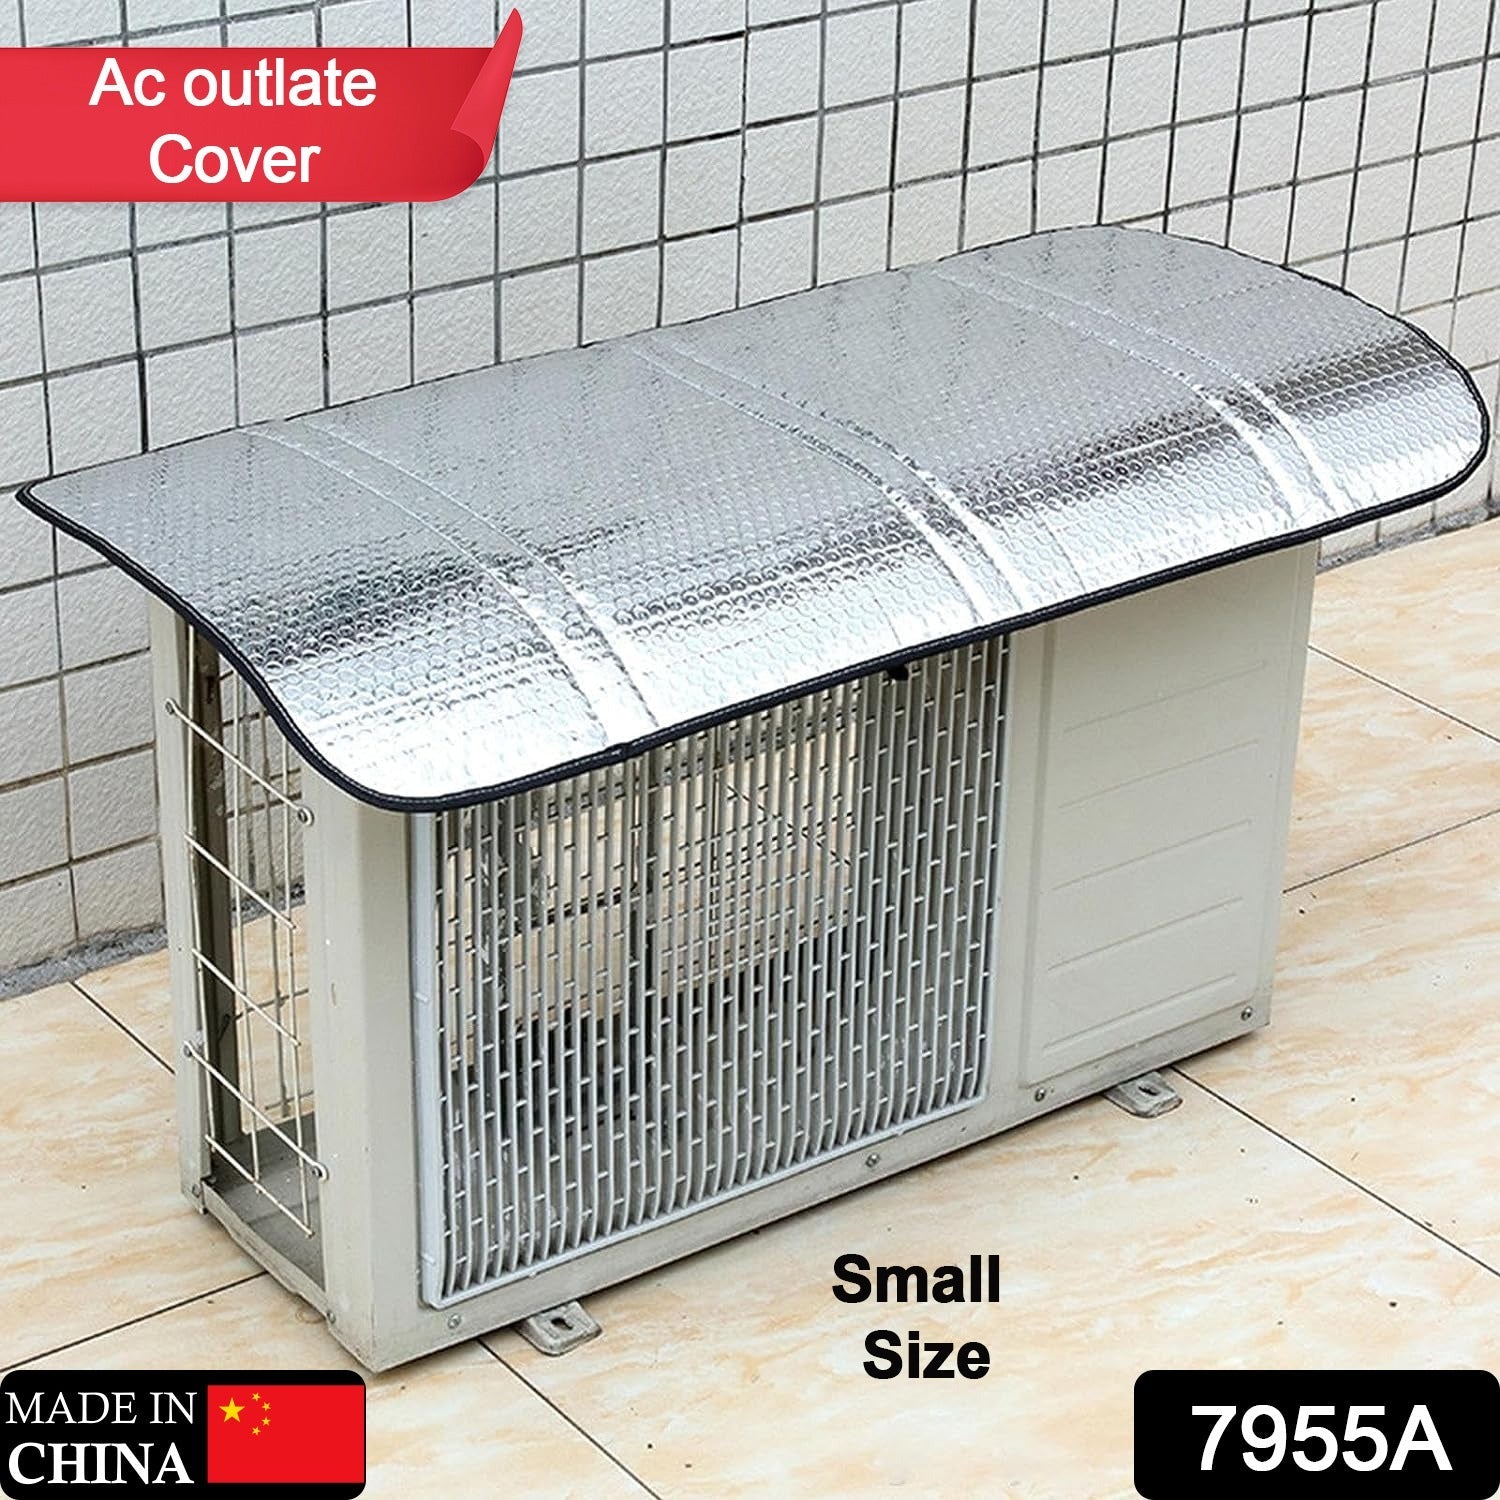 Air Conditioner Outdoor Unit Cover, Outdoor Unit Protective Cover, Aluminum Foil Material, Sun, Rain, Snow, Wind, Dust, Protects Outdoor Units Cover (Small)